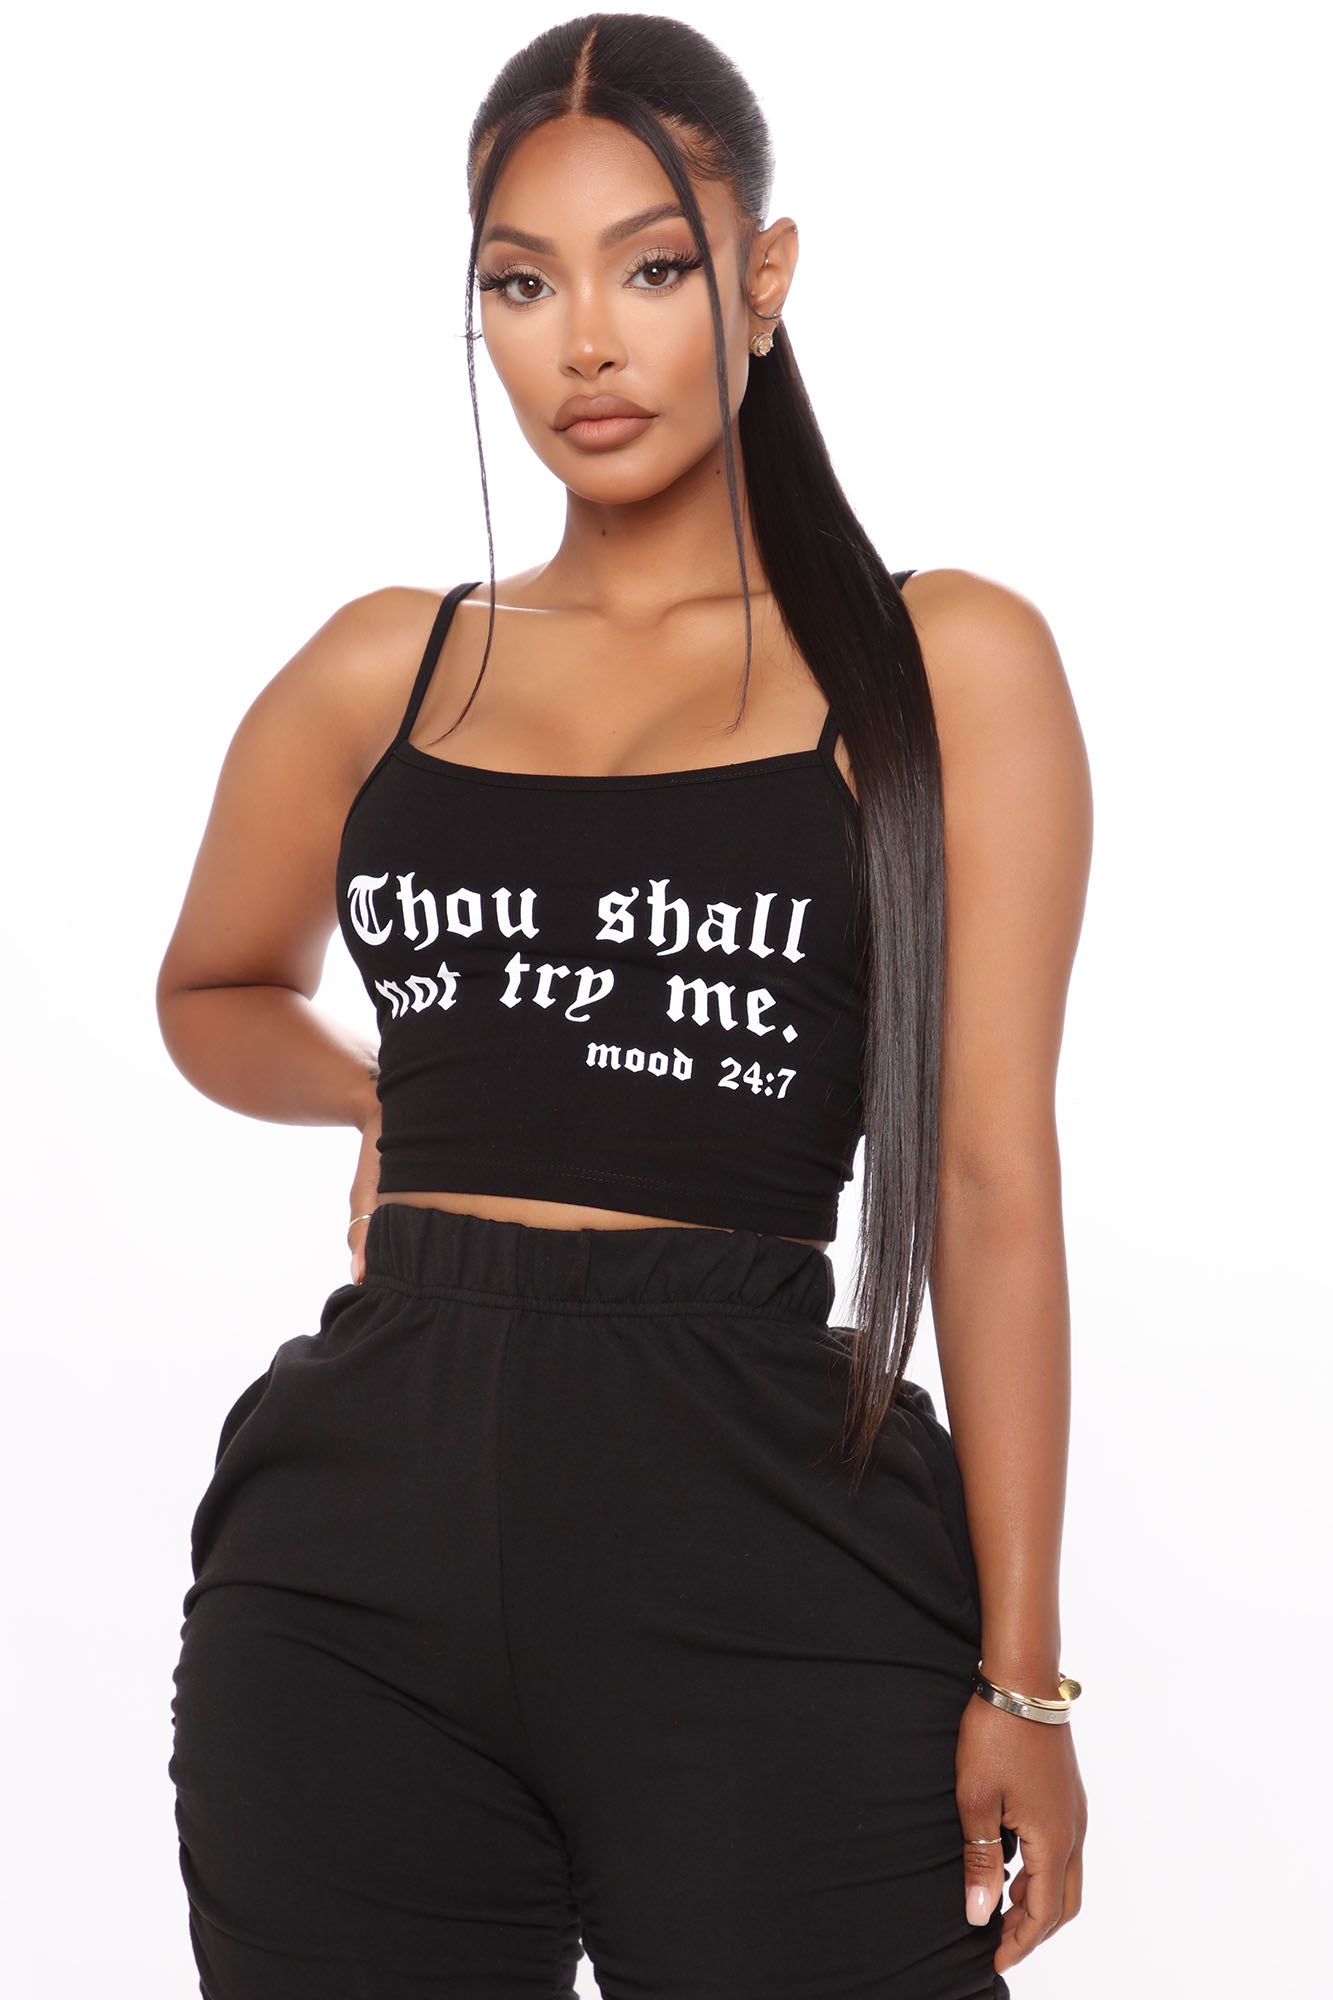 like theres literally NO WAY!!! #fashion #fashionfinds #am